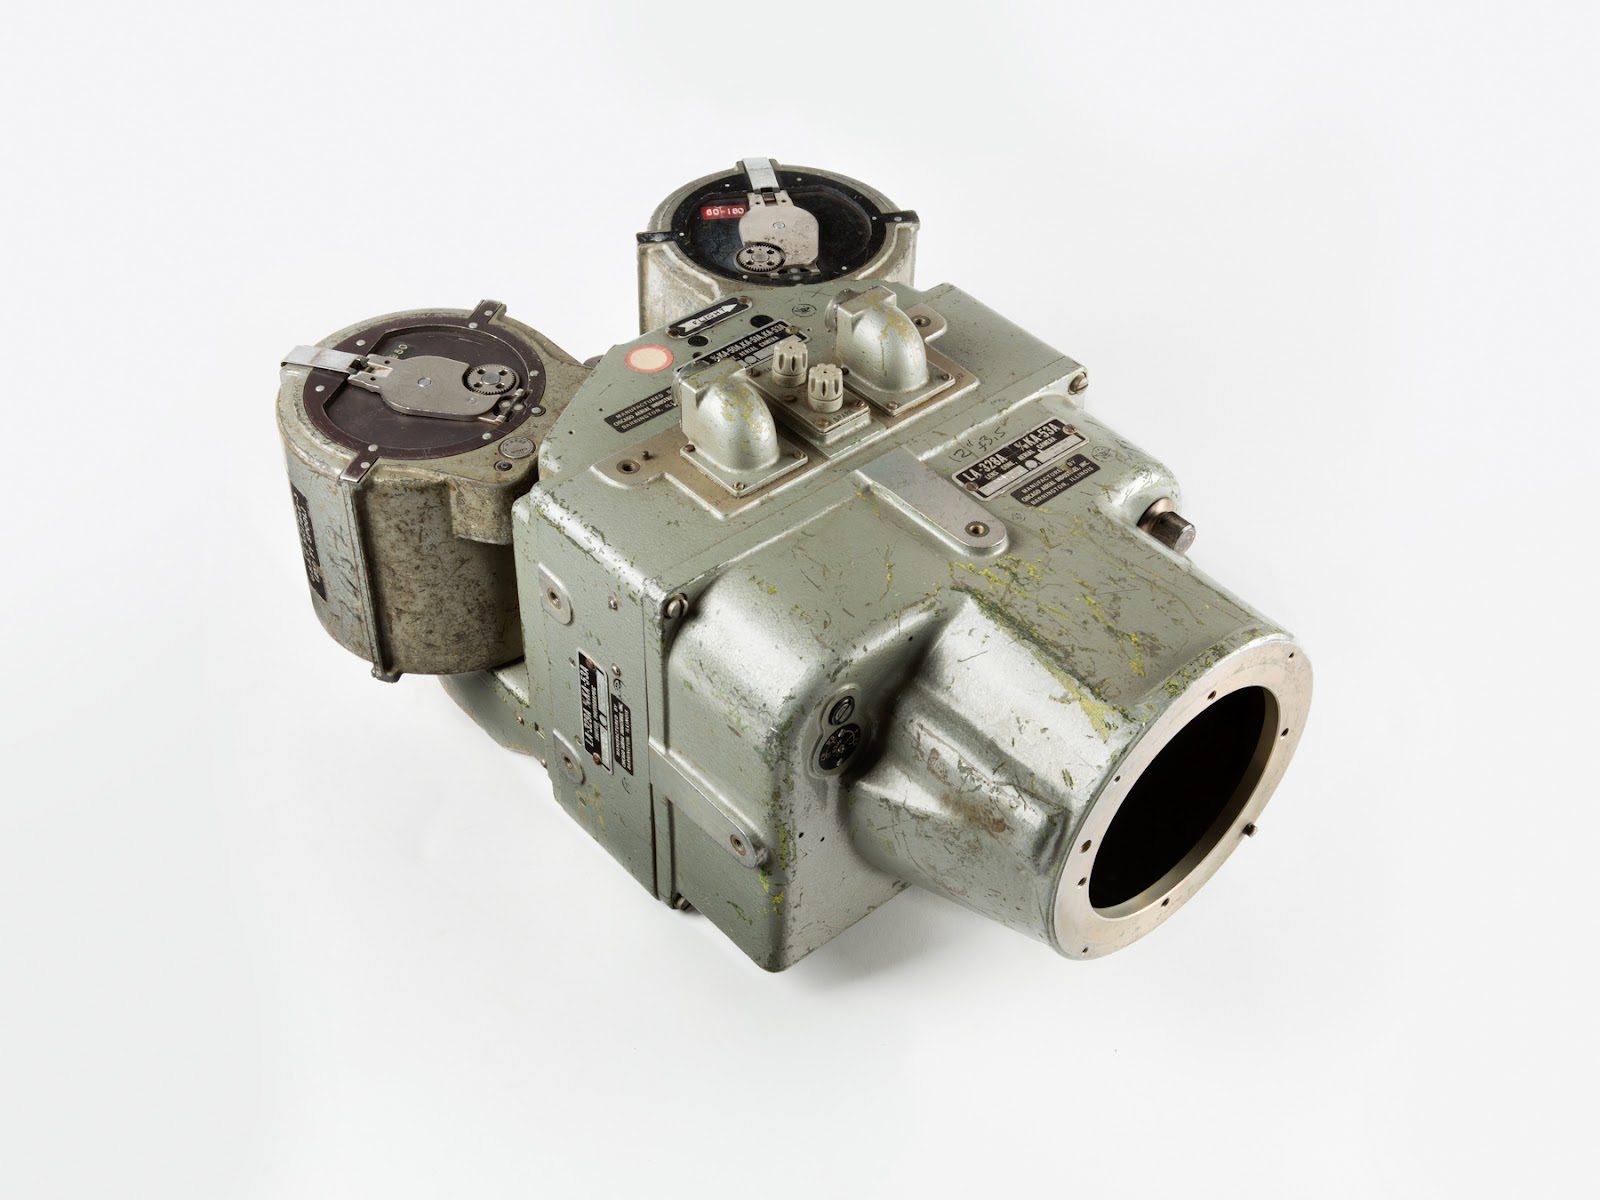 The KA 53 spy camera, part of the SPYSCAPE collection